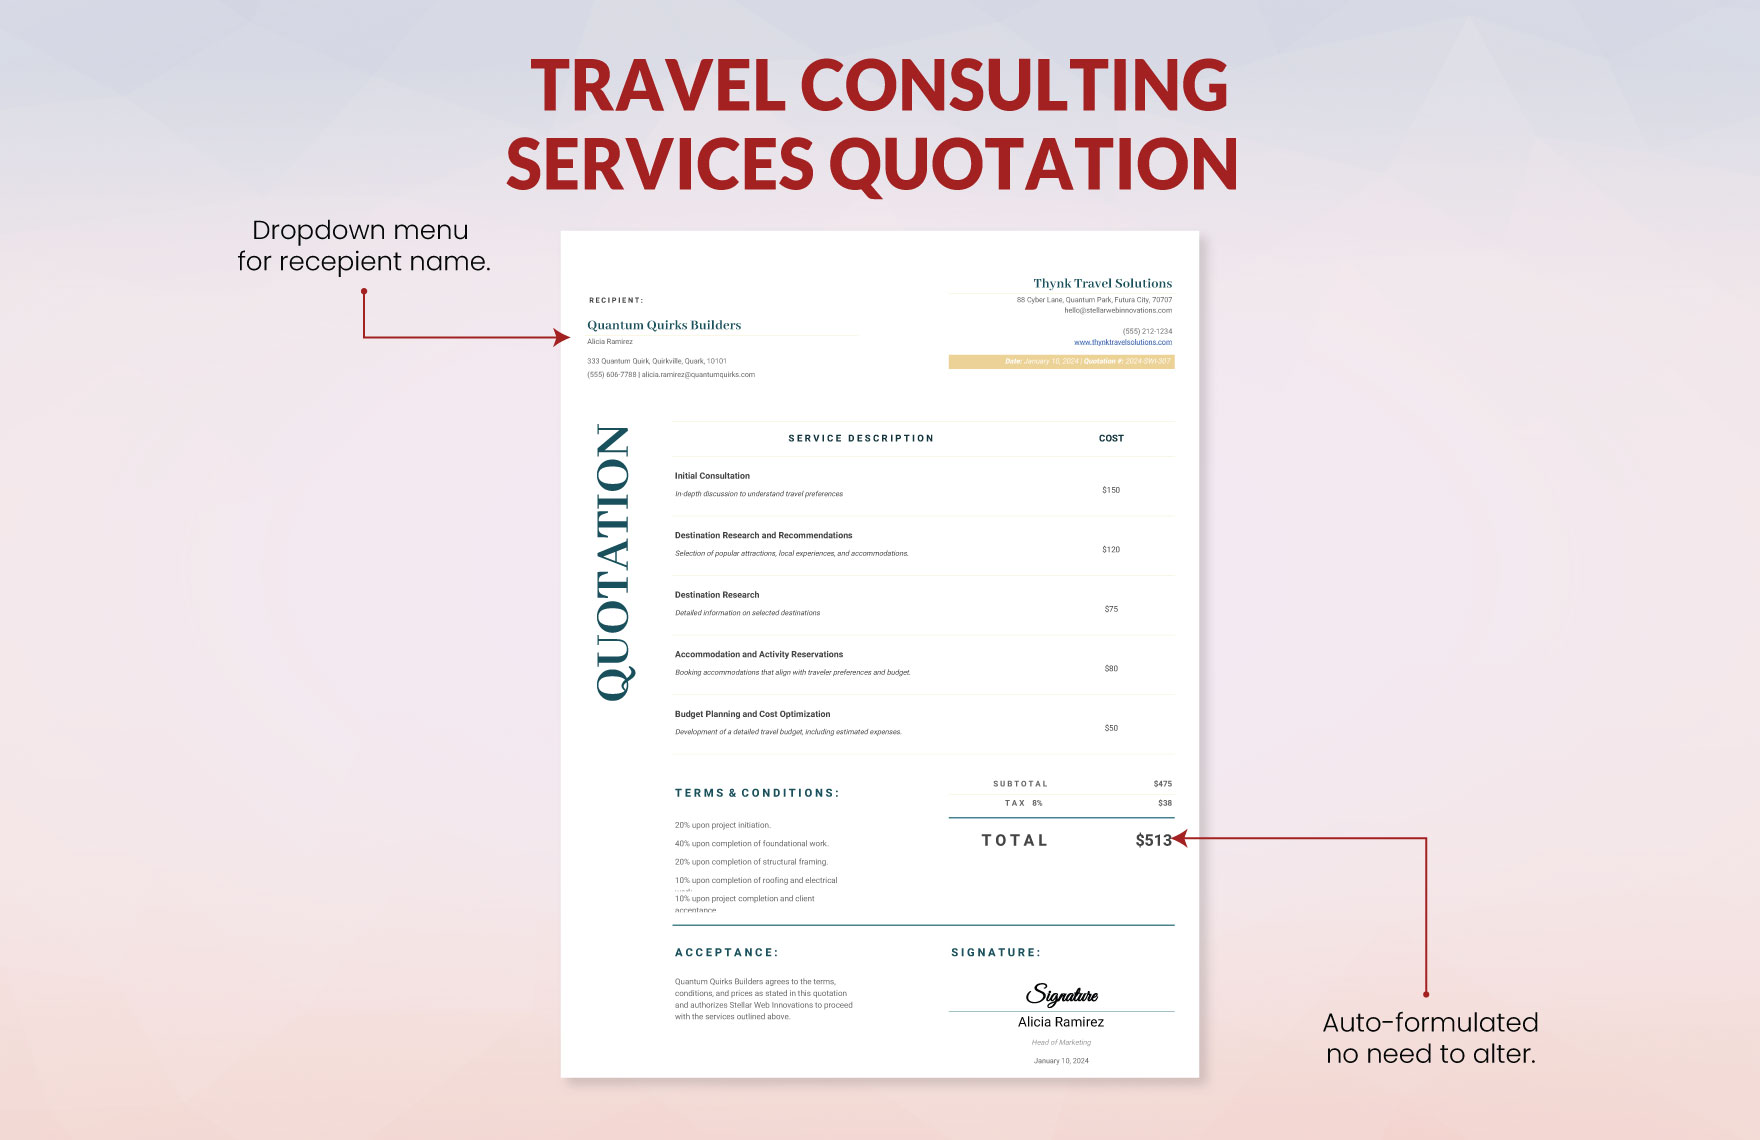 Travel Consulting Services Quotation Template